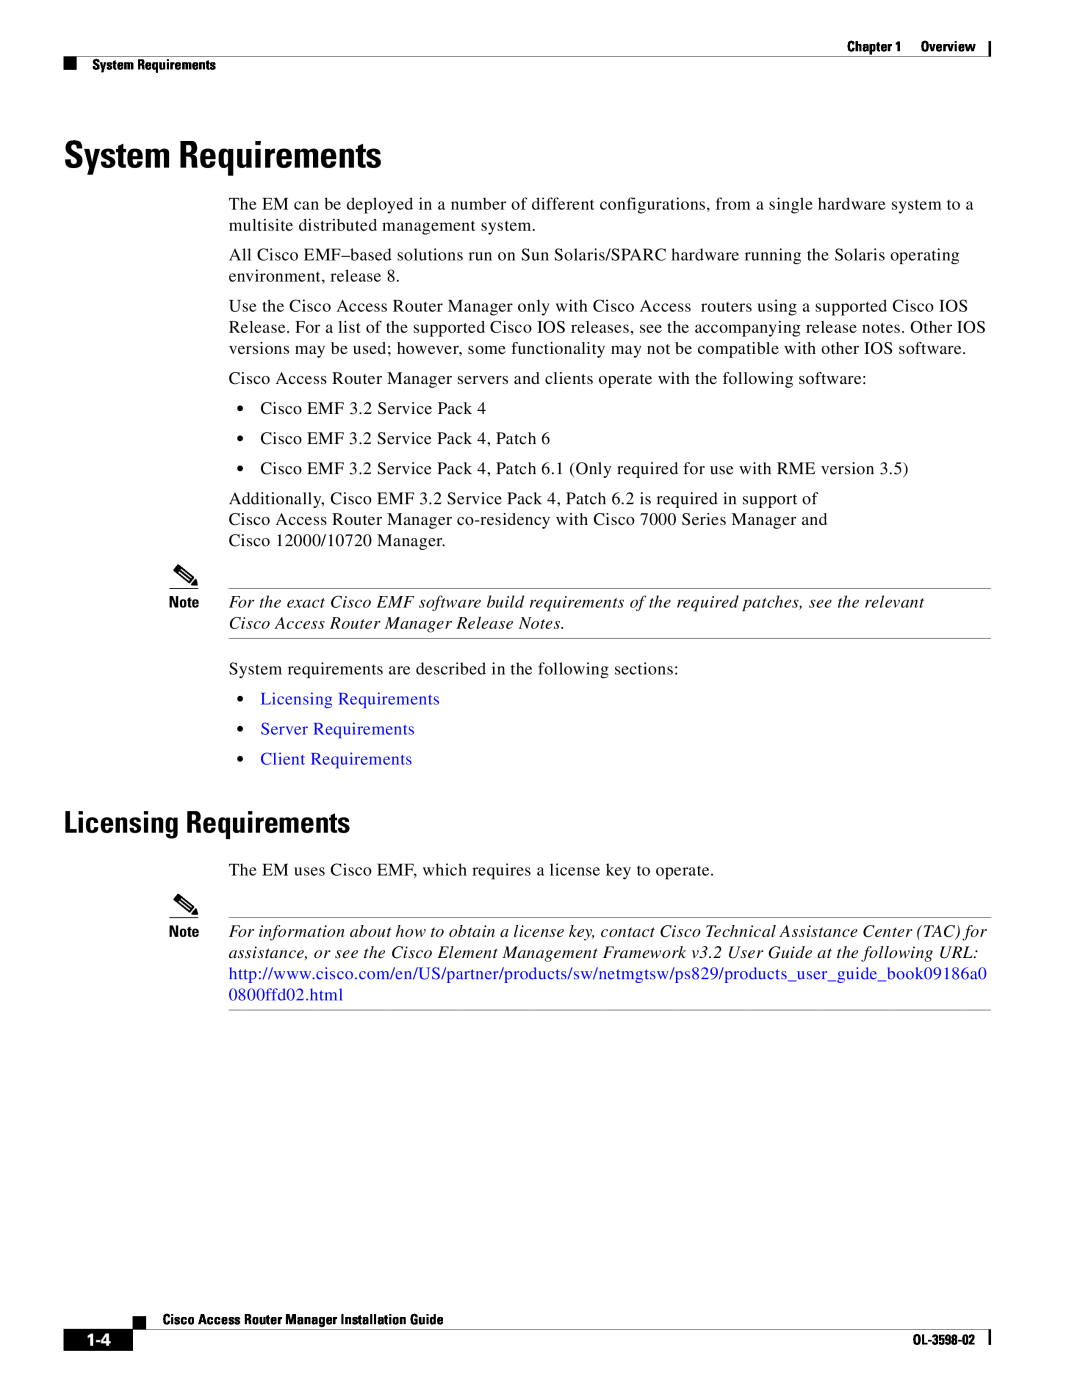 Cisco Systems OL-3598-02 manual System Requirements, Licensing Requirements 